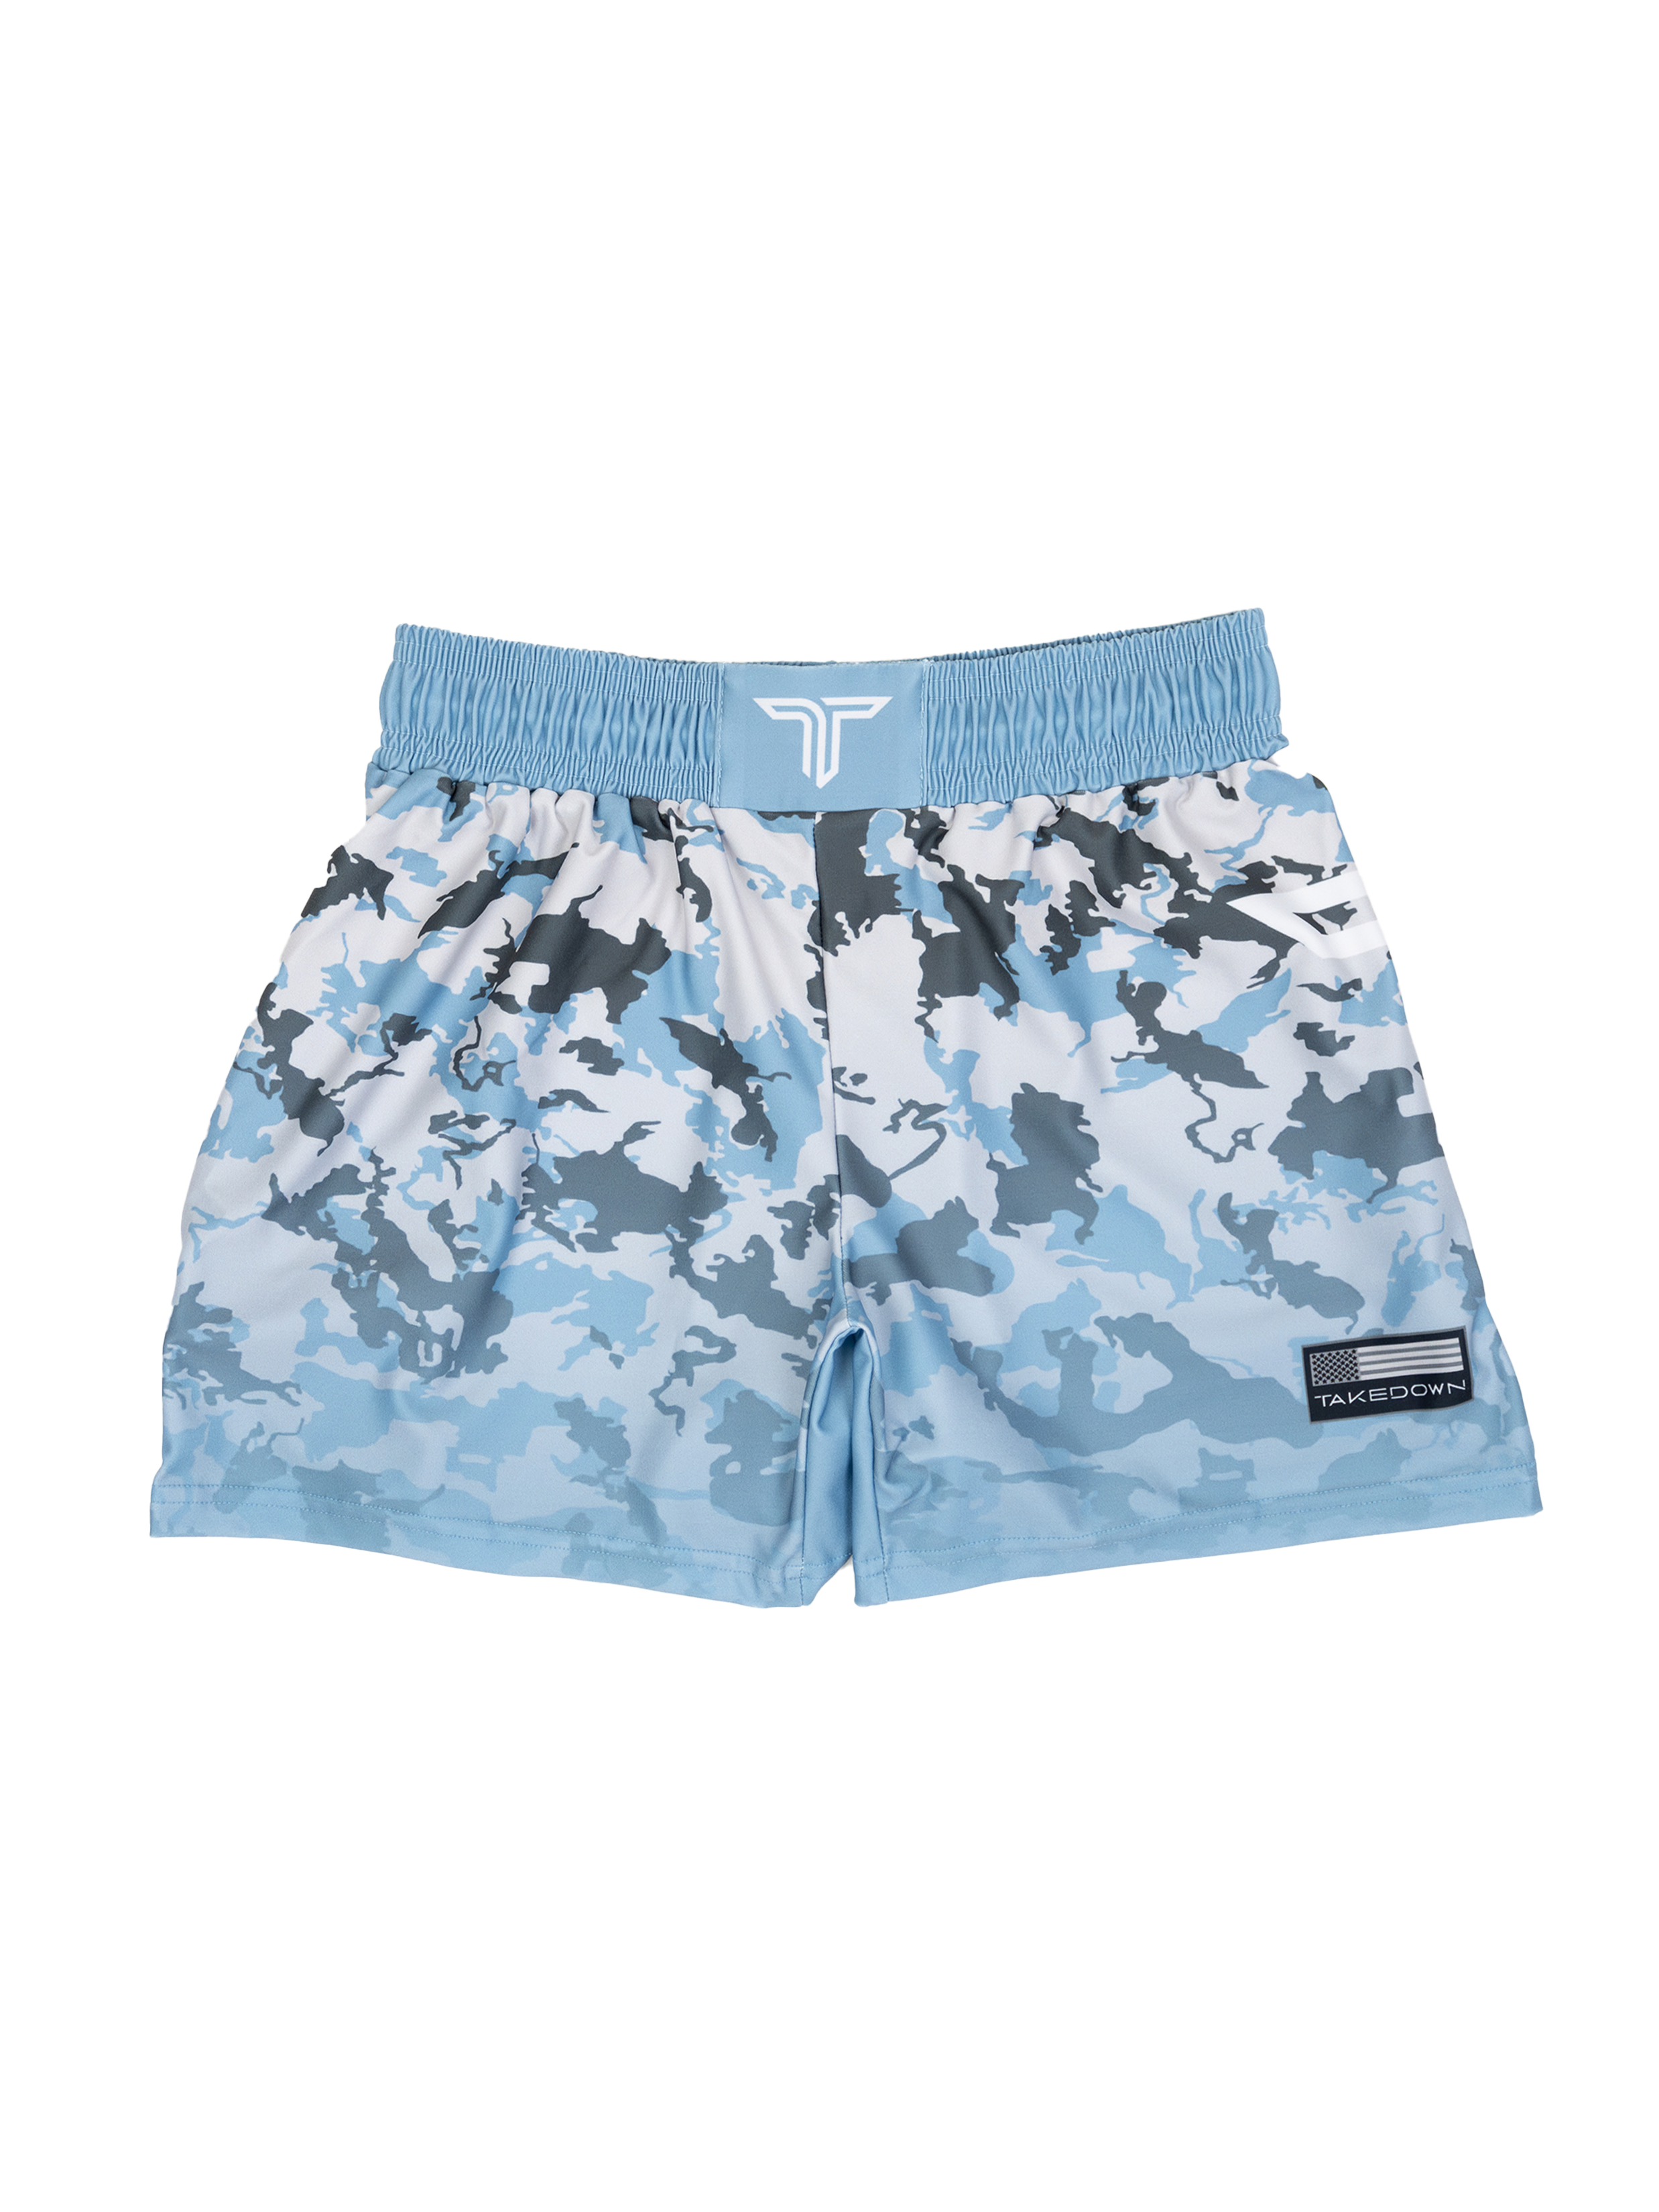 Particle Camo Fight Shorts - Ice Blue (5